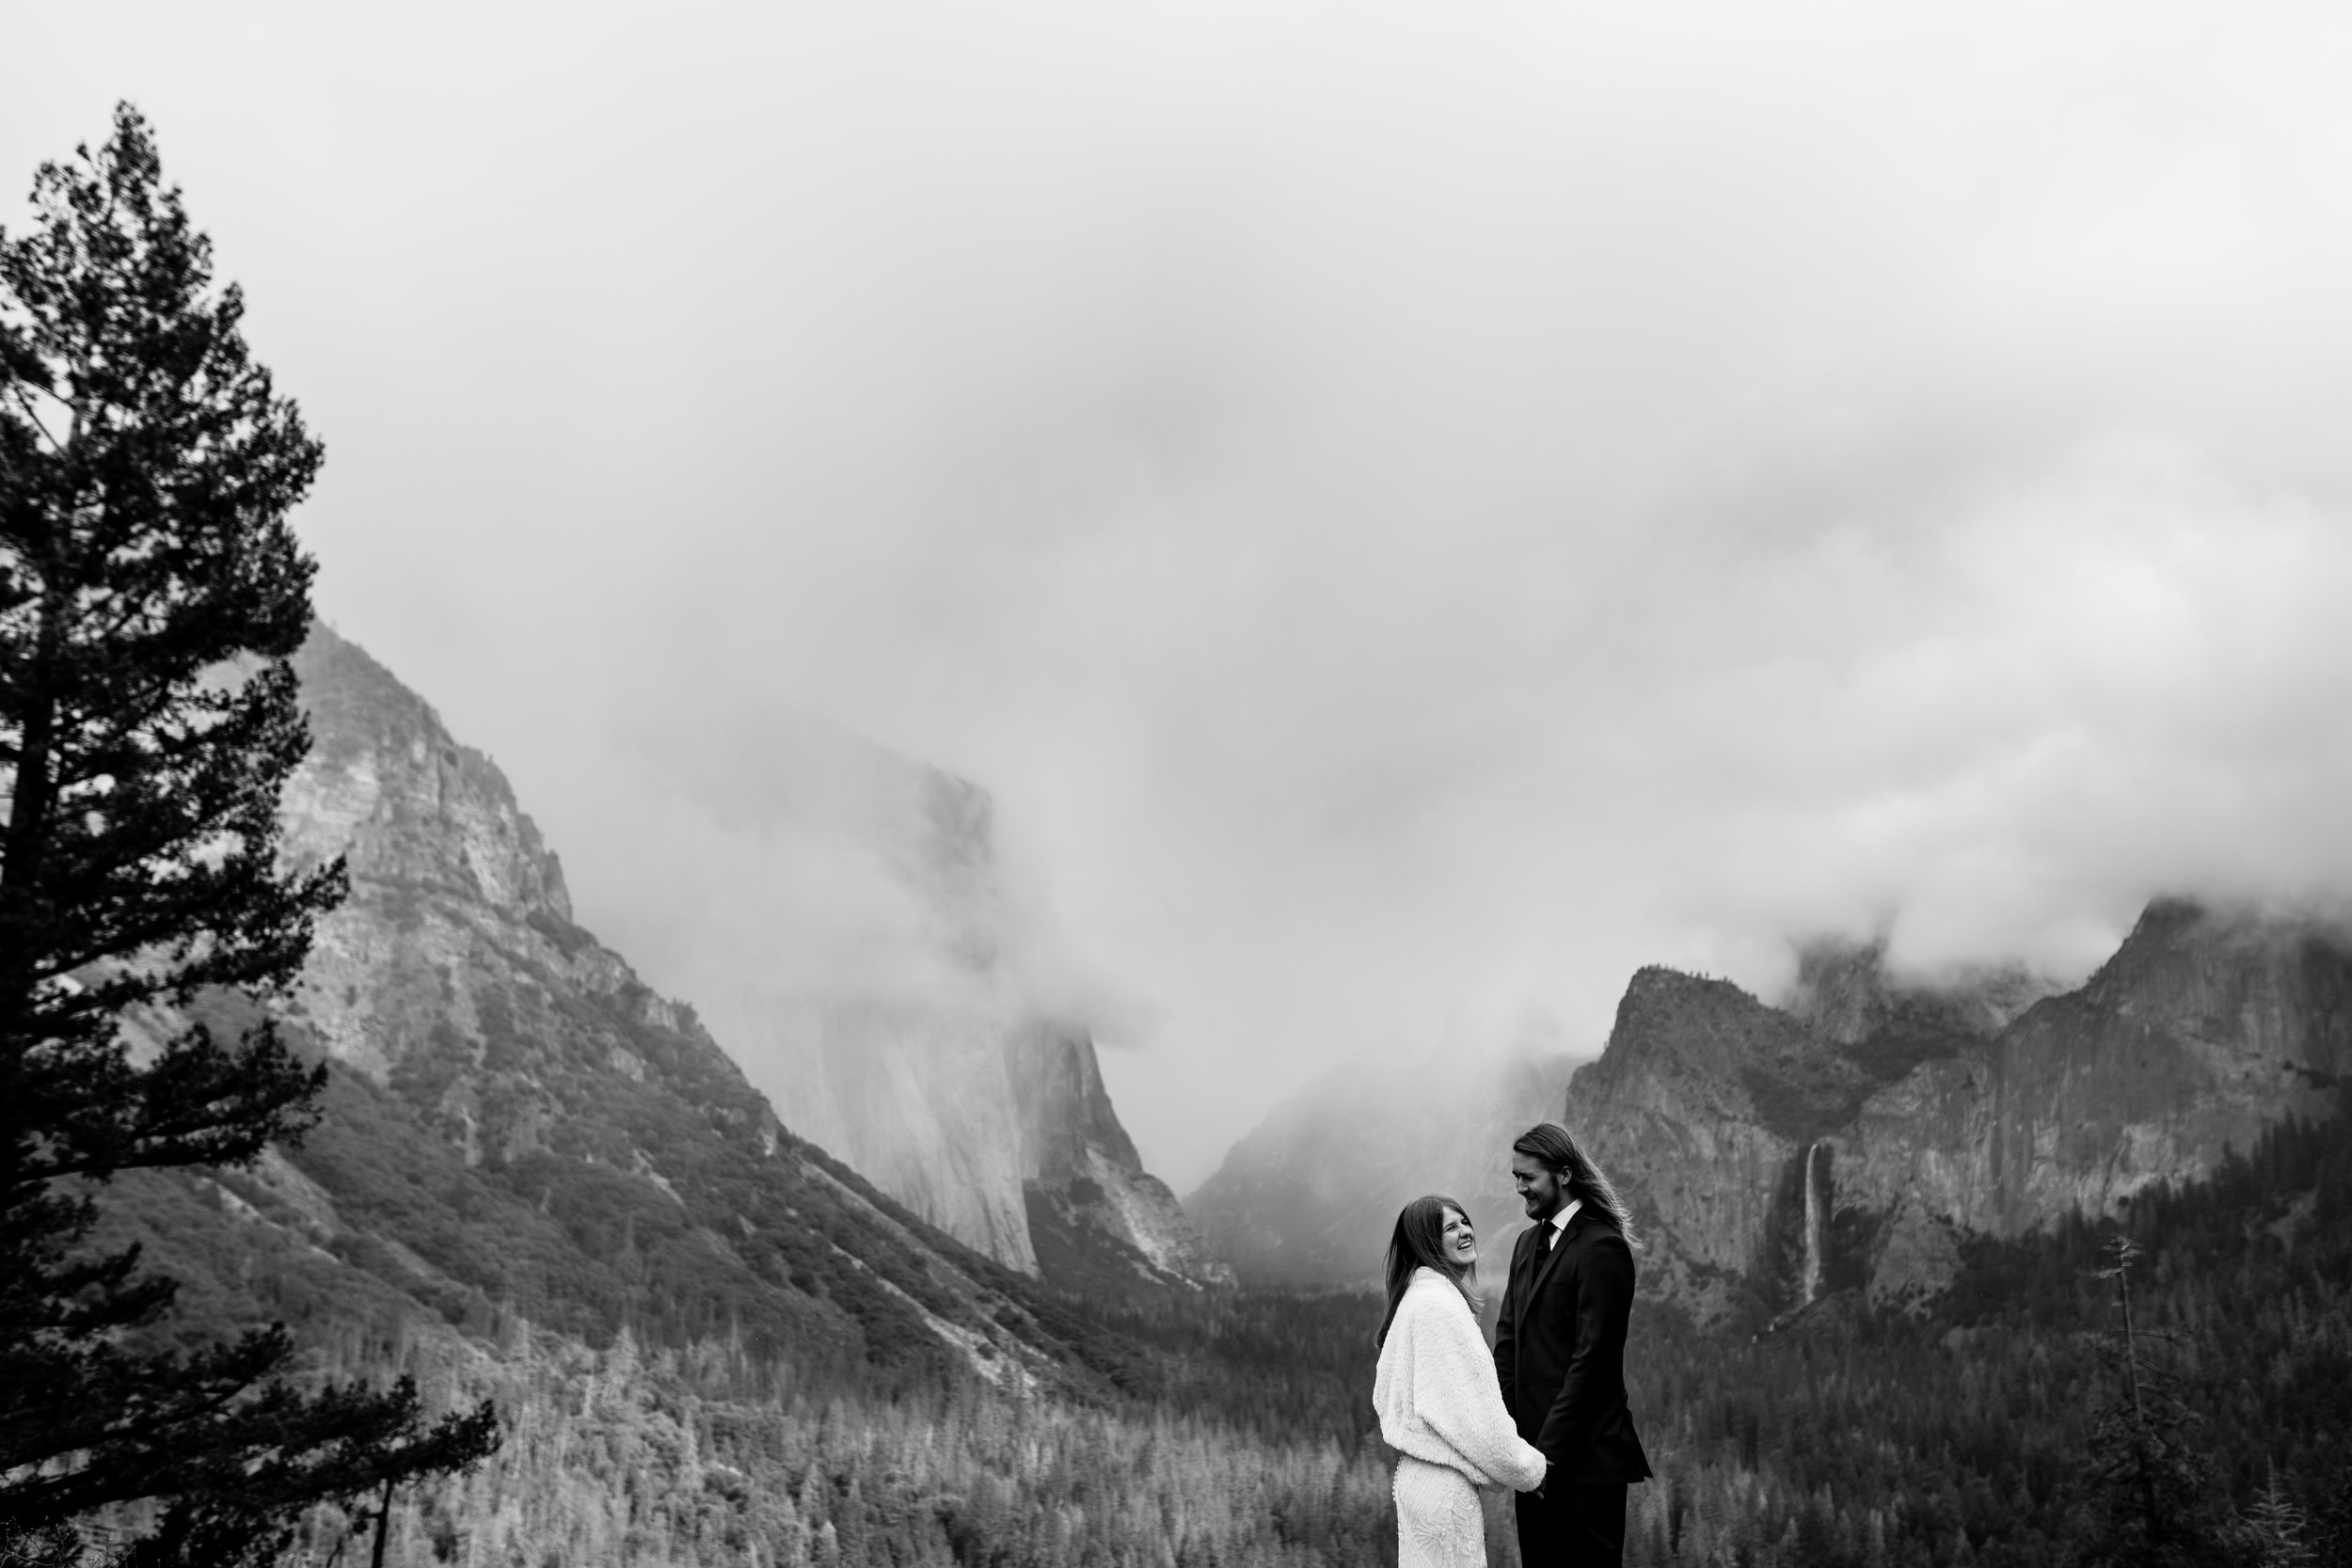 nicole-daacke-photography-yousemite-national-park-elopement-photographer-winter-cloud-moody-elope-inspiration-yosemite-valley-tunnel-view-winter-cloud-fog-weather-wedding-photos-12.jpg